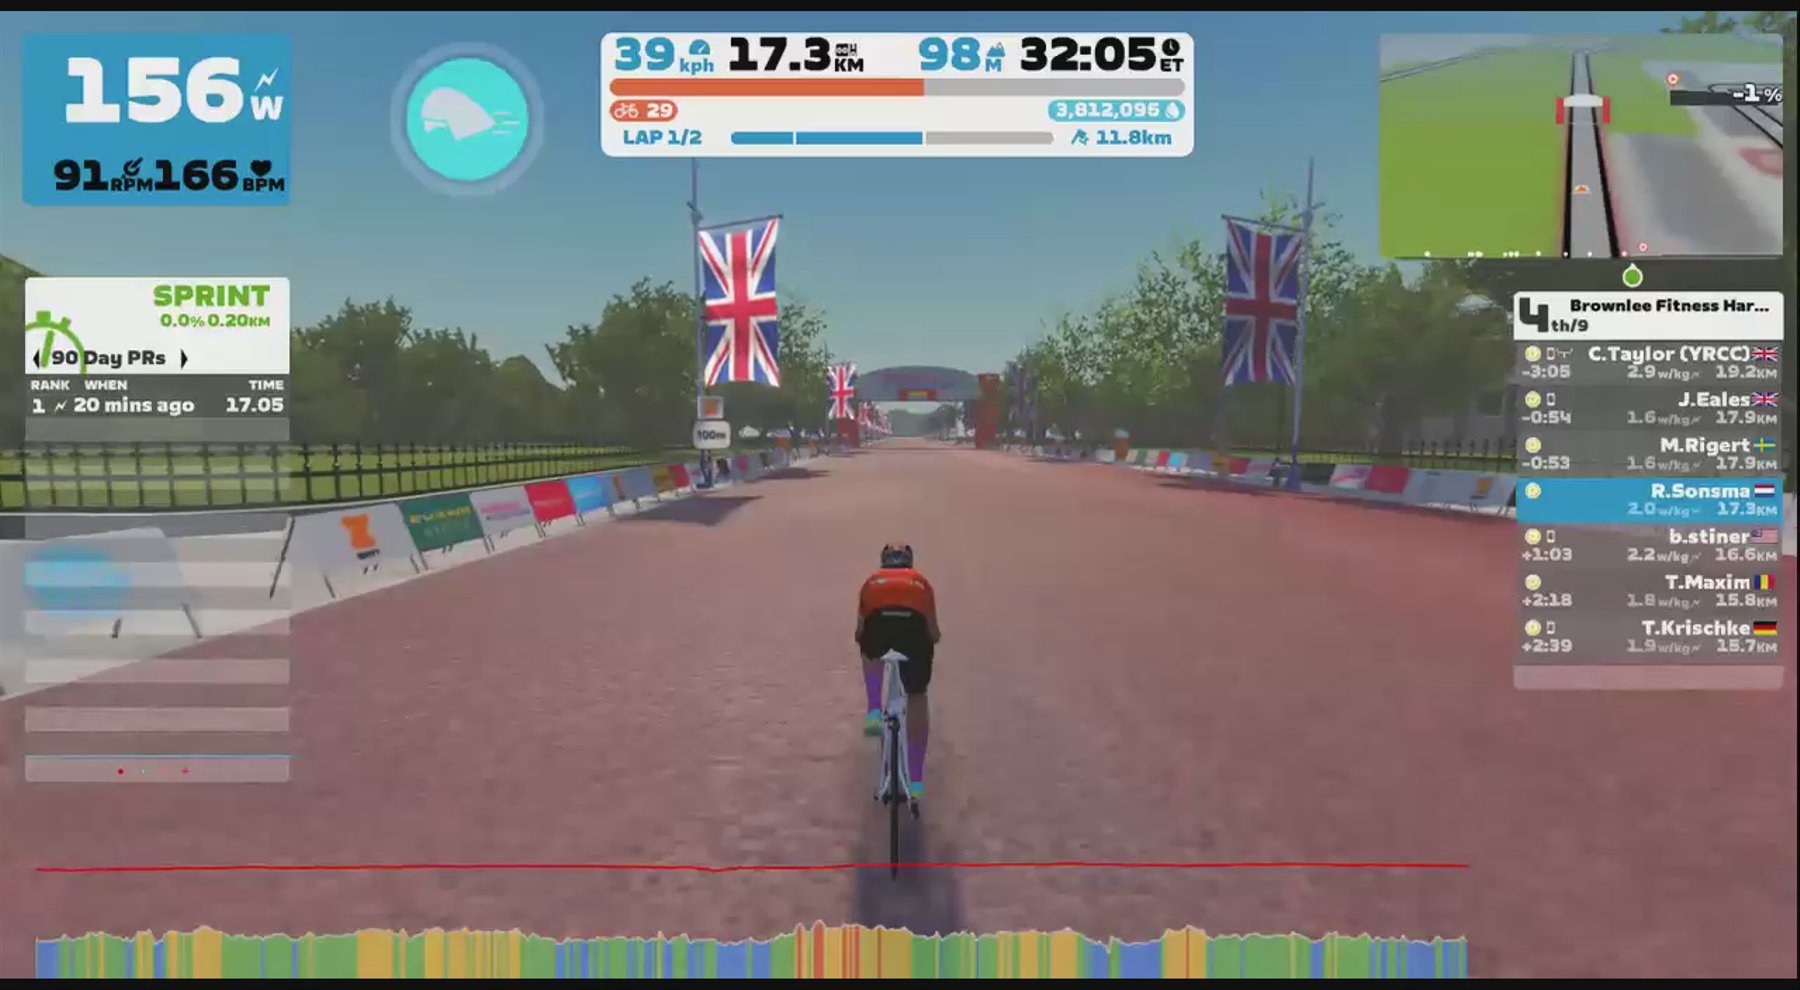 Zwift - Group Ride: Brownlee Fitness Hare & Hounds  (D) on Greater London Flat in London